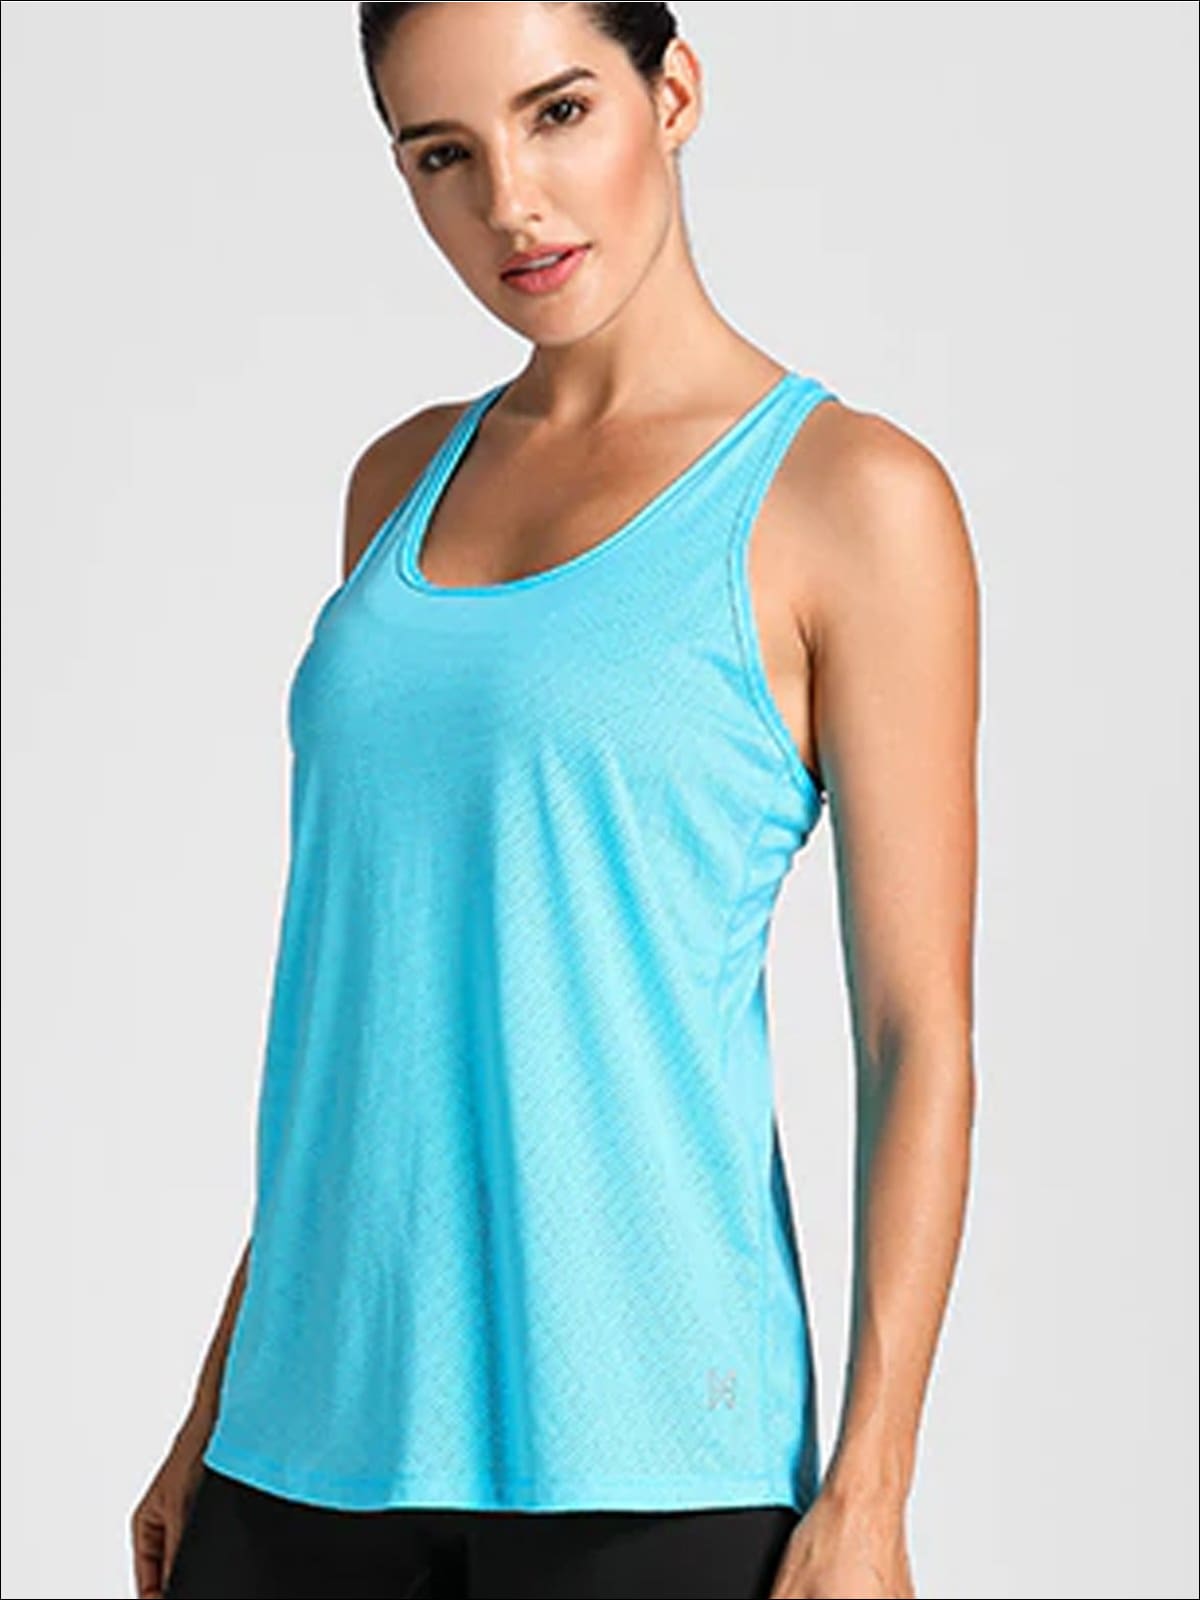 TAIPOVE Tank Tops Running Shirts w Built in Bra Cotton Athletic Yoga for  Women Lounge Strappy Active Wear 2 Packs Aqua/Navy at  Women's  Clothing store